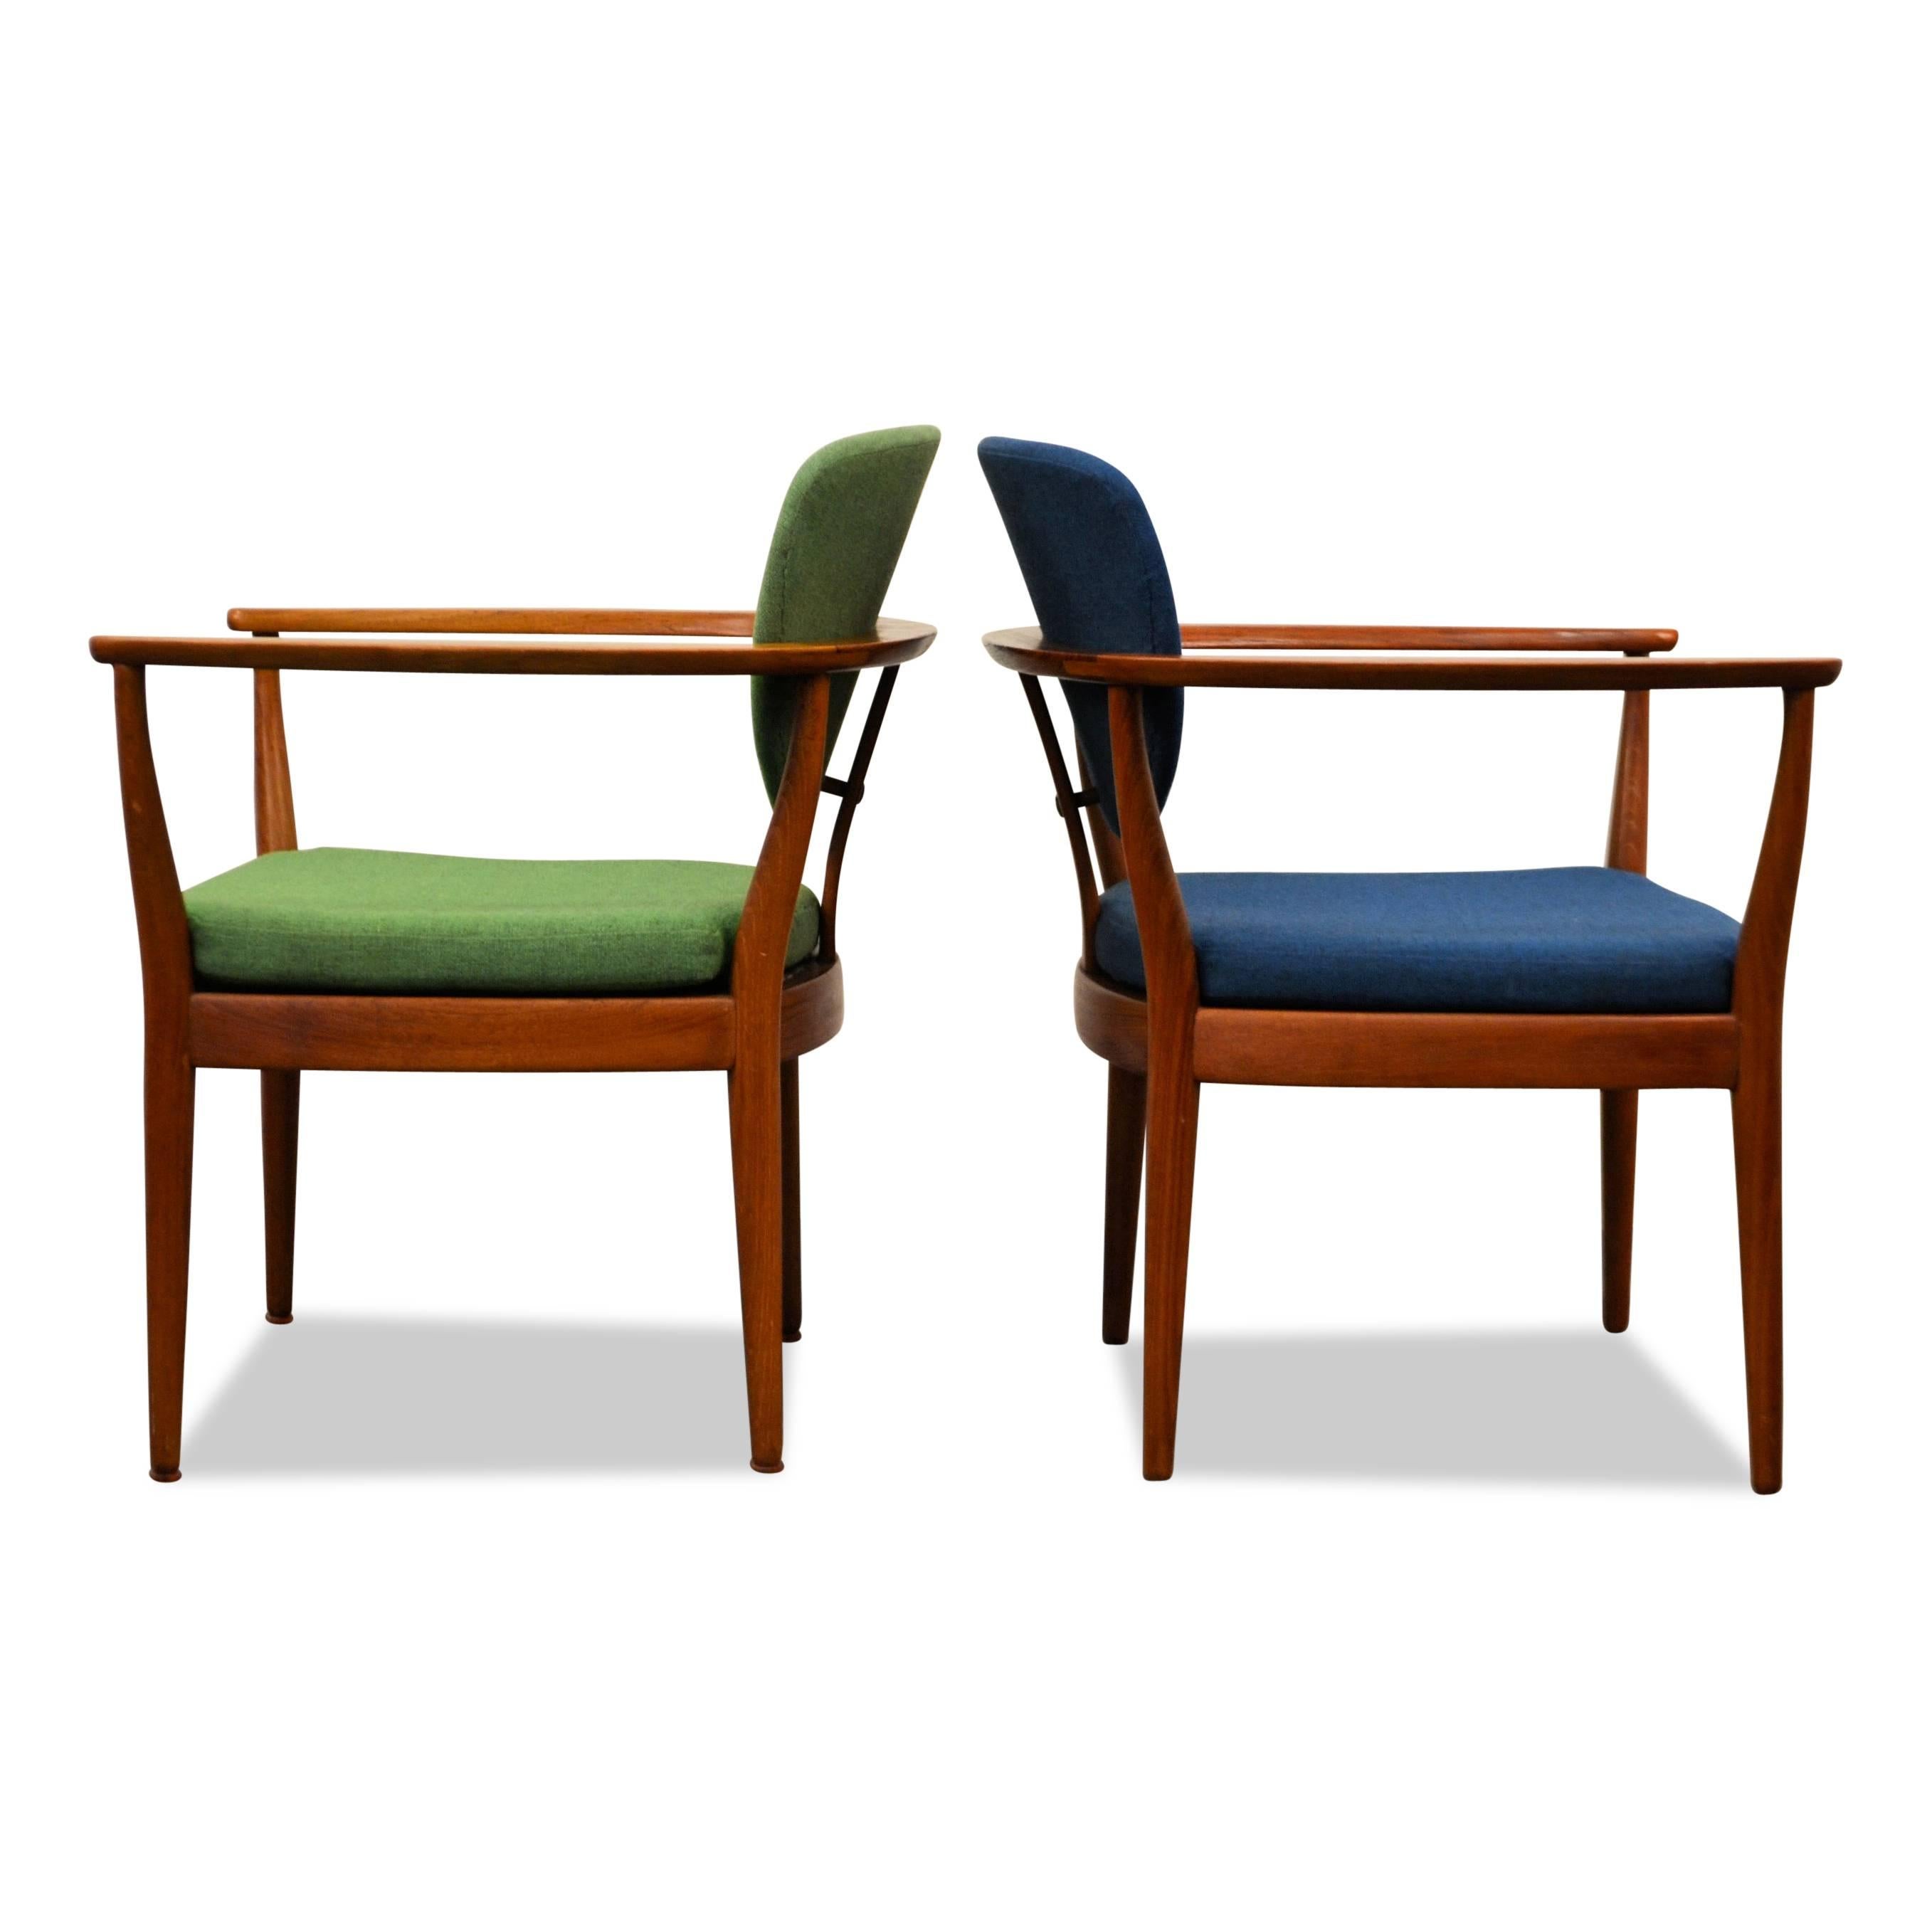 Super stylish pair of Danish Modern lounge chairs designed by an unknown Danish designer. Made out of beautiful teak wood, upholstered in beautiful green and blue woven fabric, loose seat cushions and featuring gorgeous curved backrests. This pair